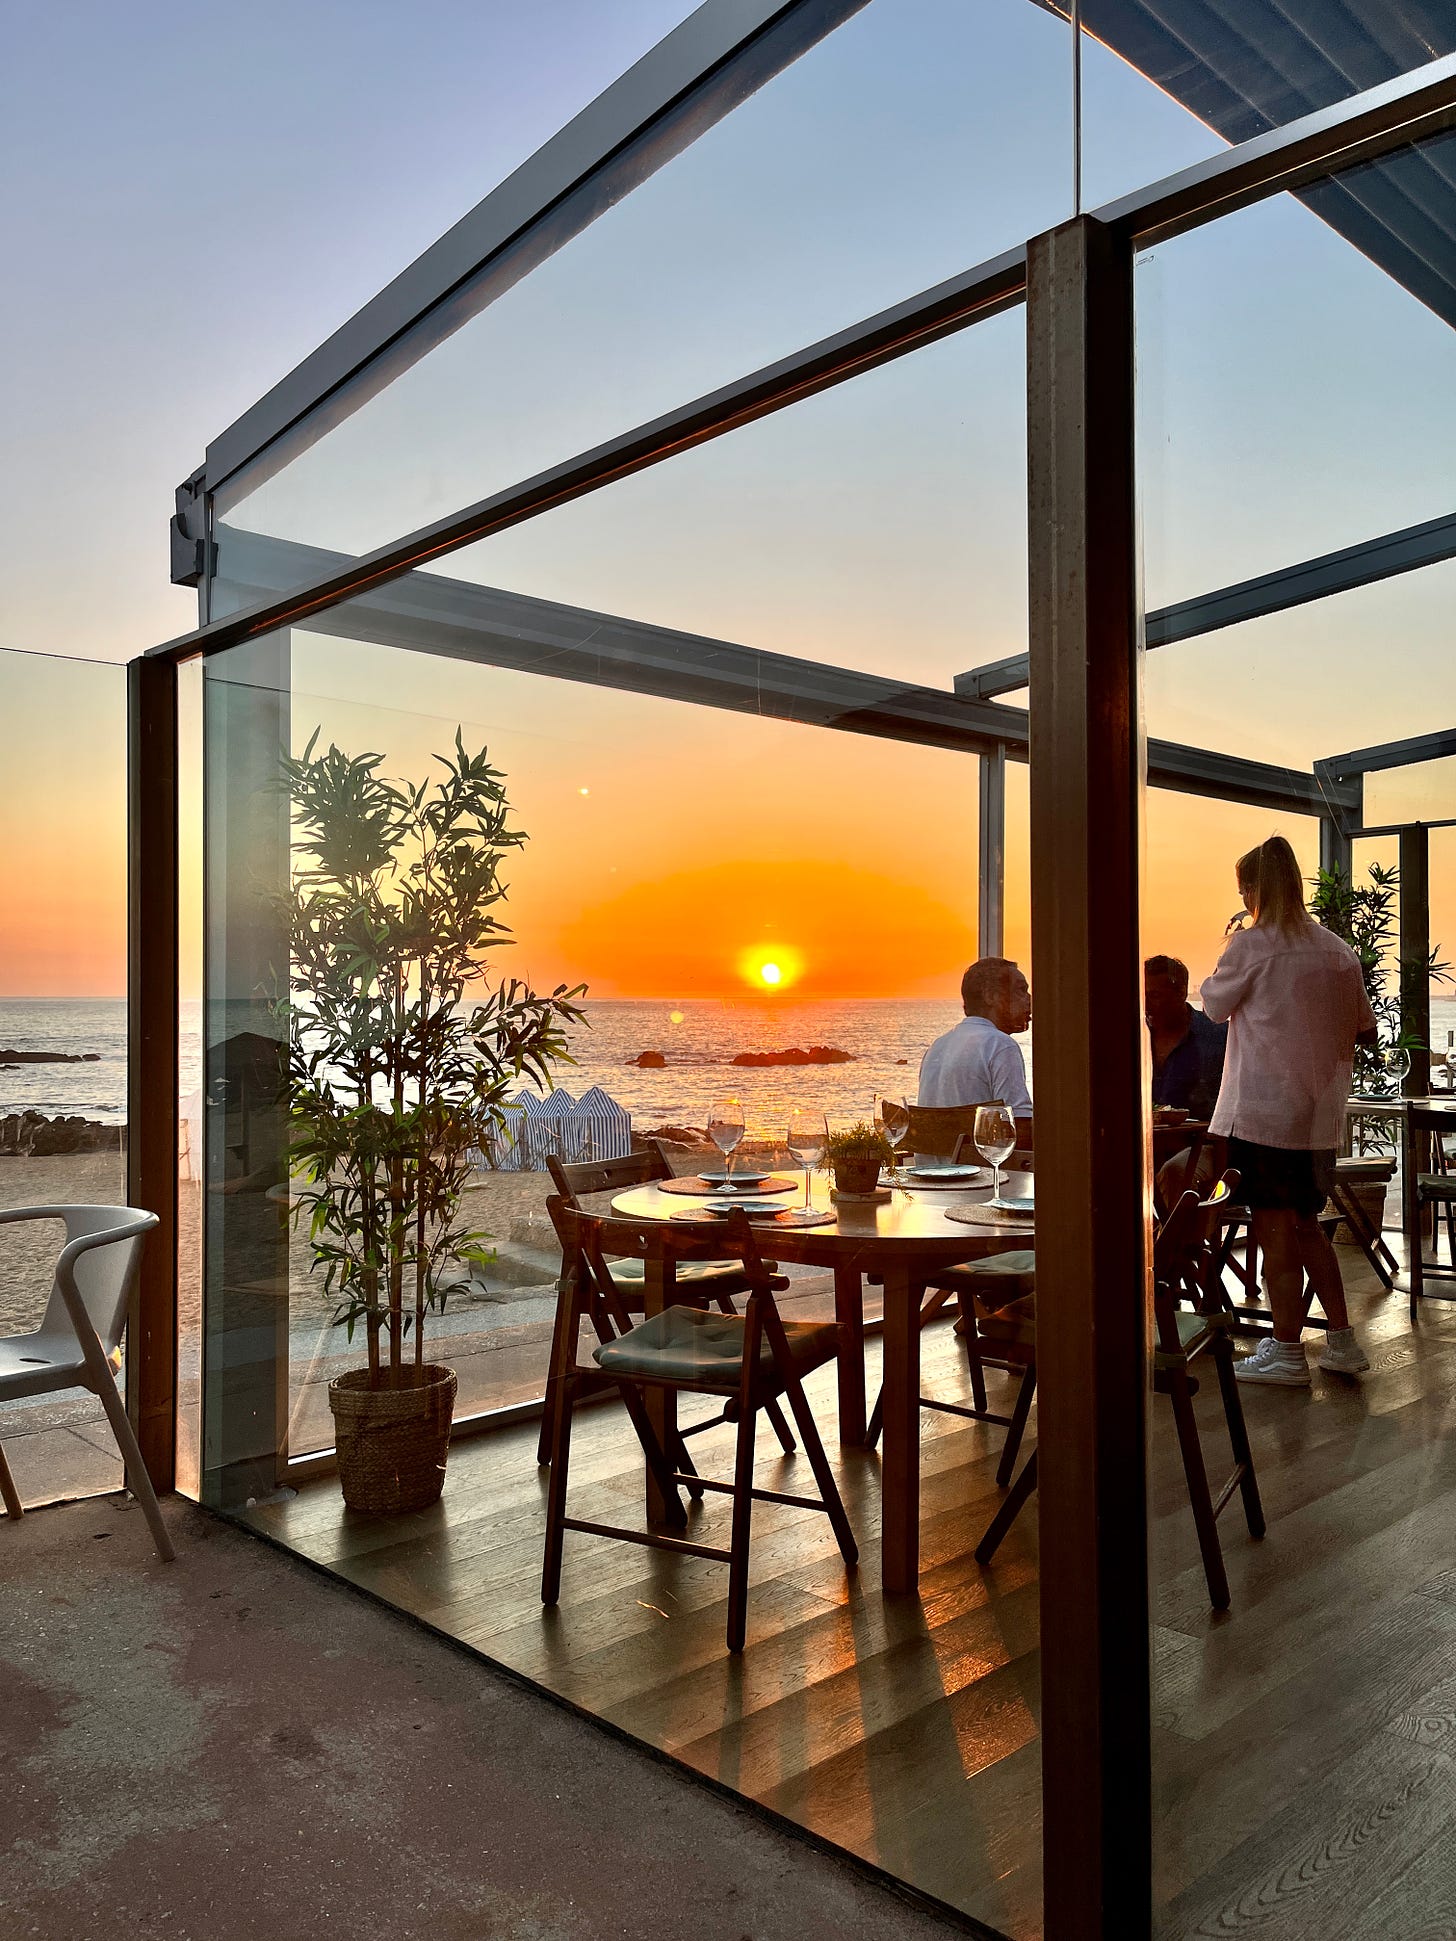 Image: a gorgeous scene of sunset over the Atlantic Ocean, with diners enjoying wine and conversations, overlooking the beach. 